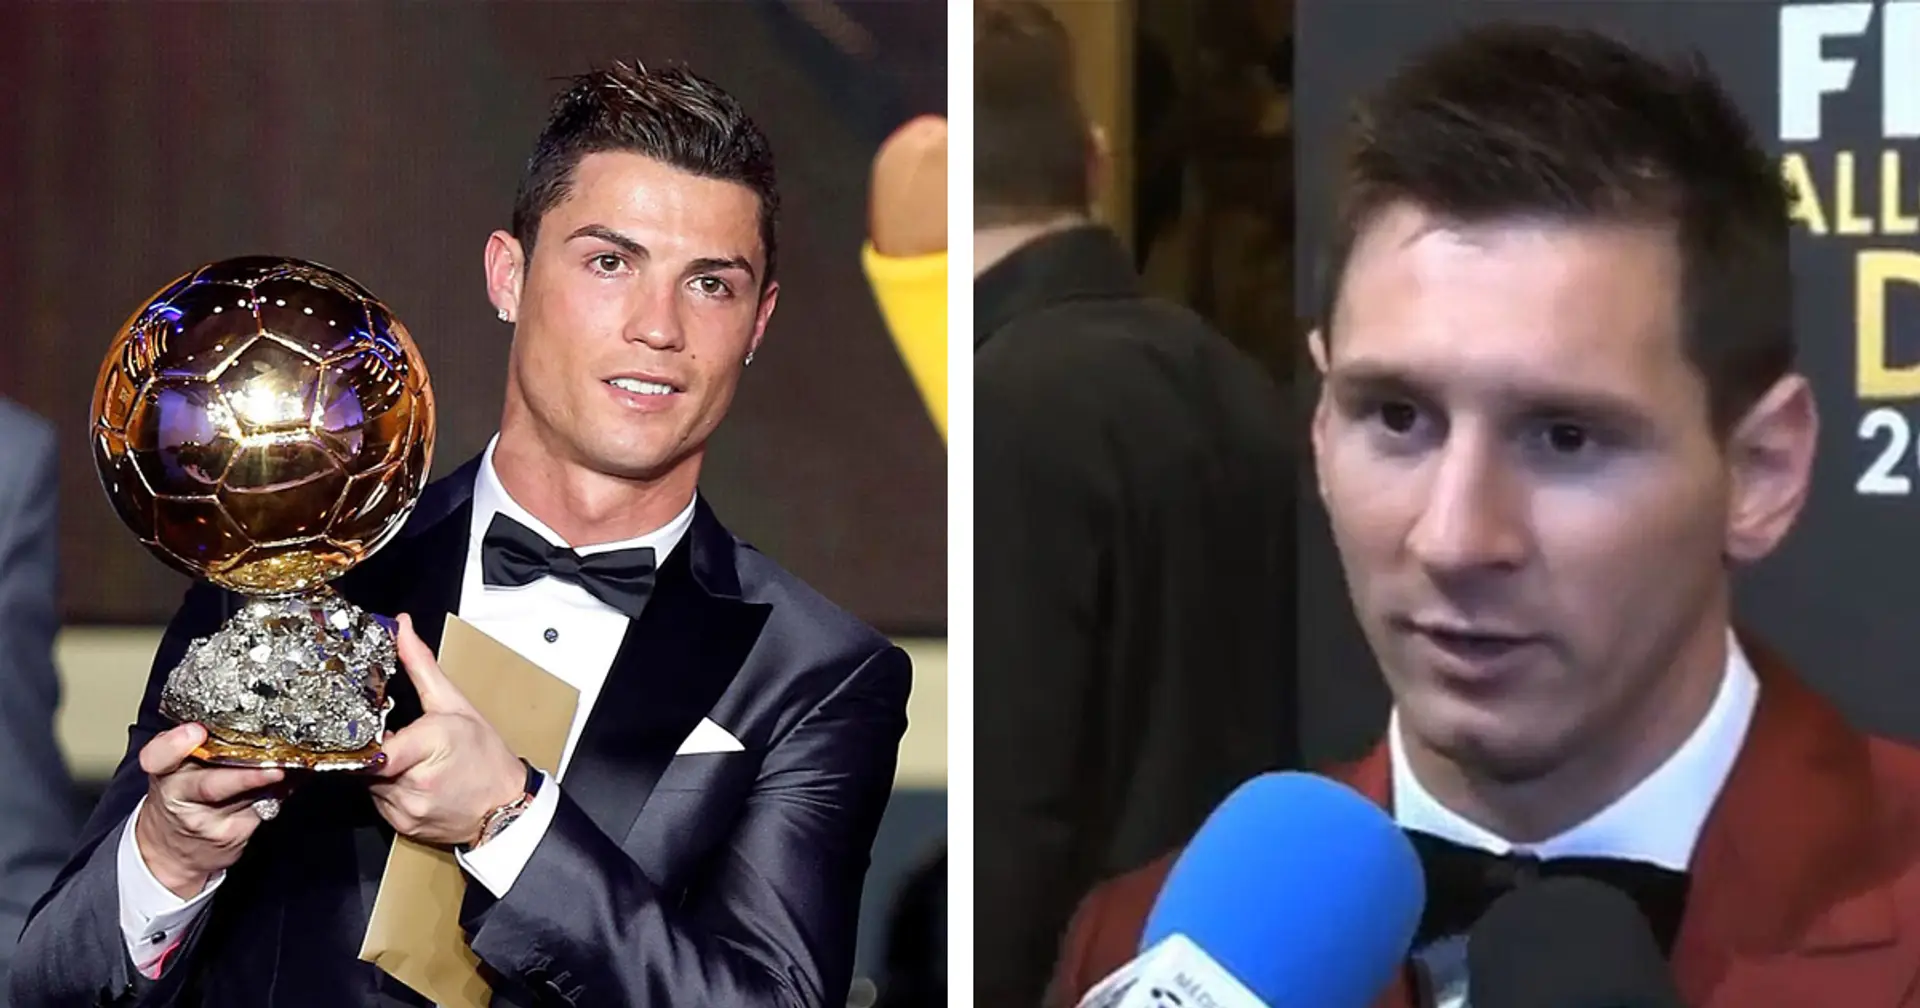 'No complaints, no excuses': How humble Leo Messi reacted to Cristiano Ronaldo breaking his Ballon d'Or domination in 2014